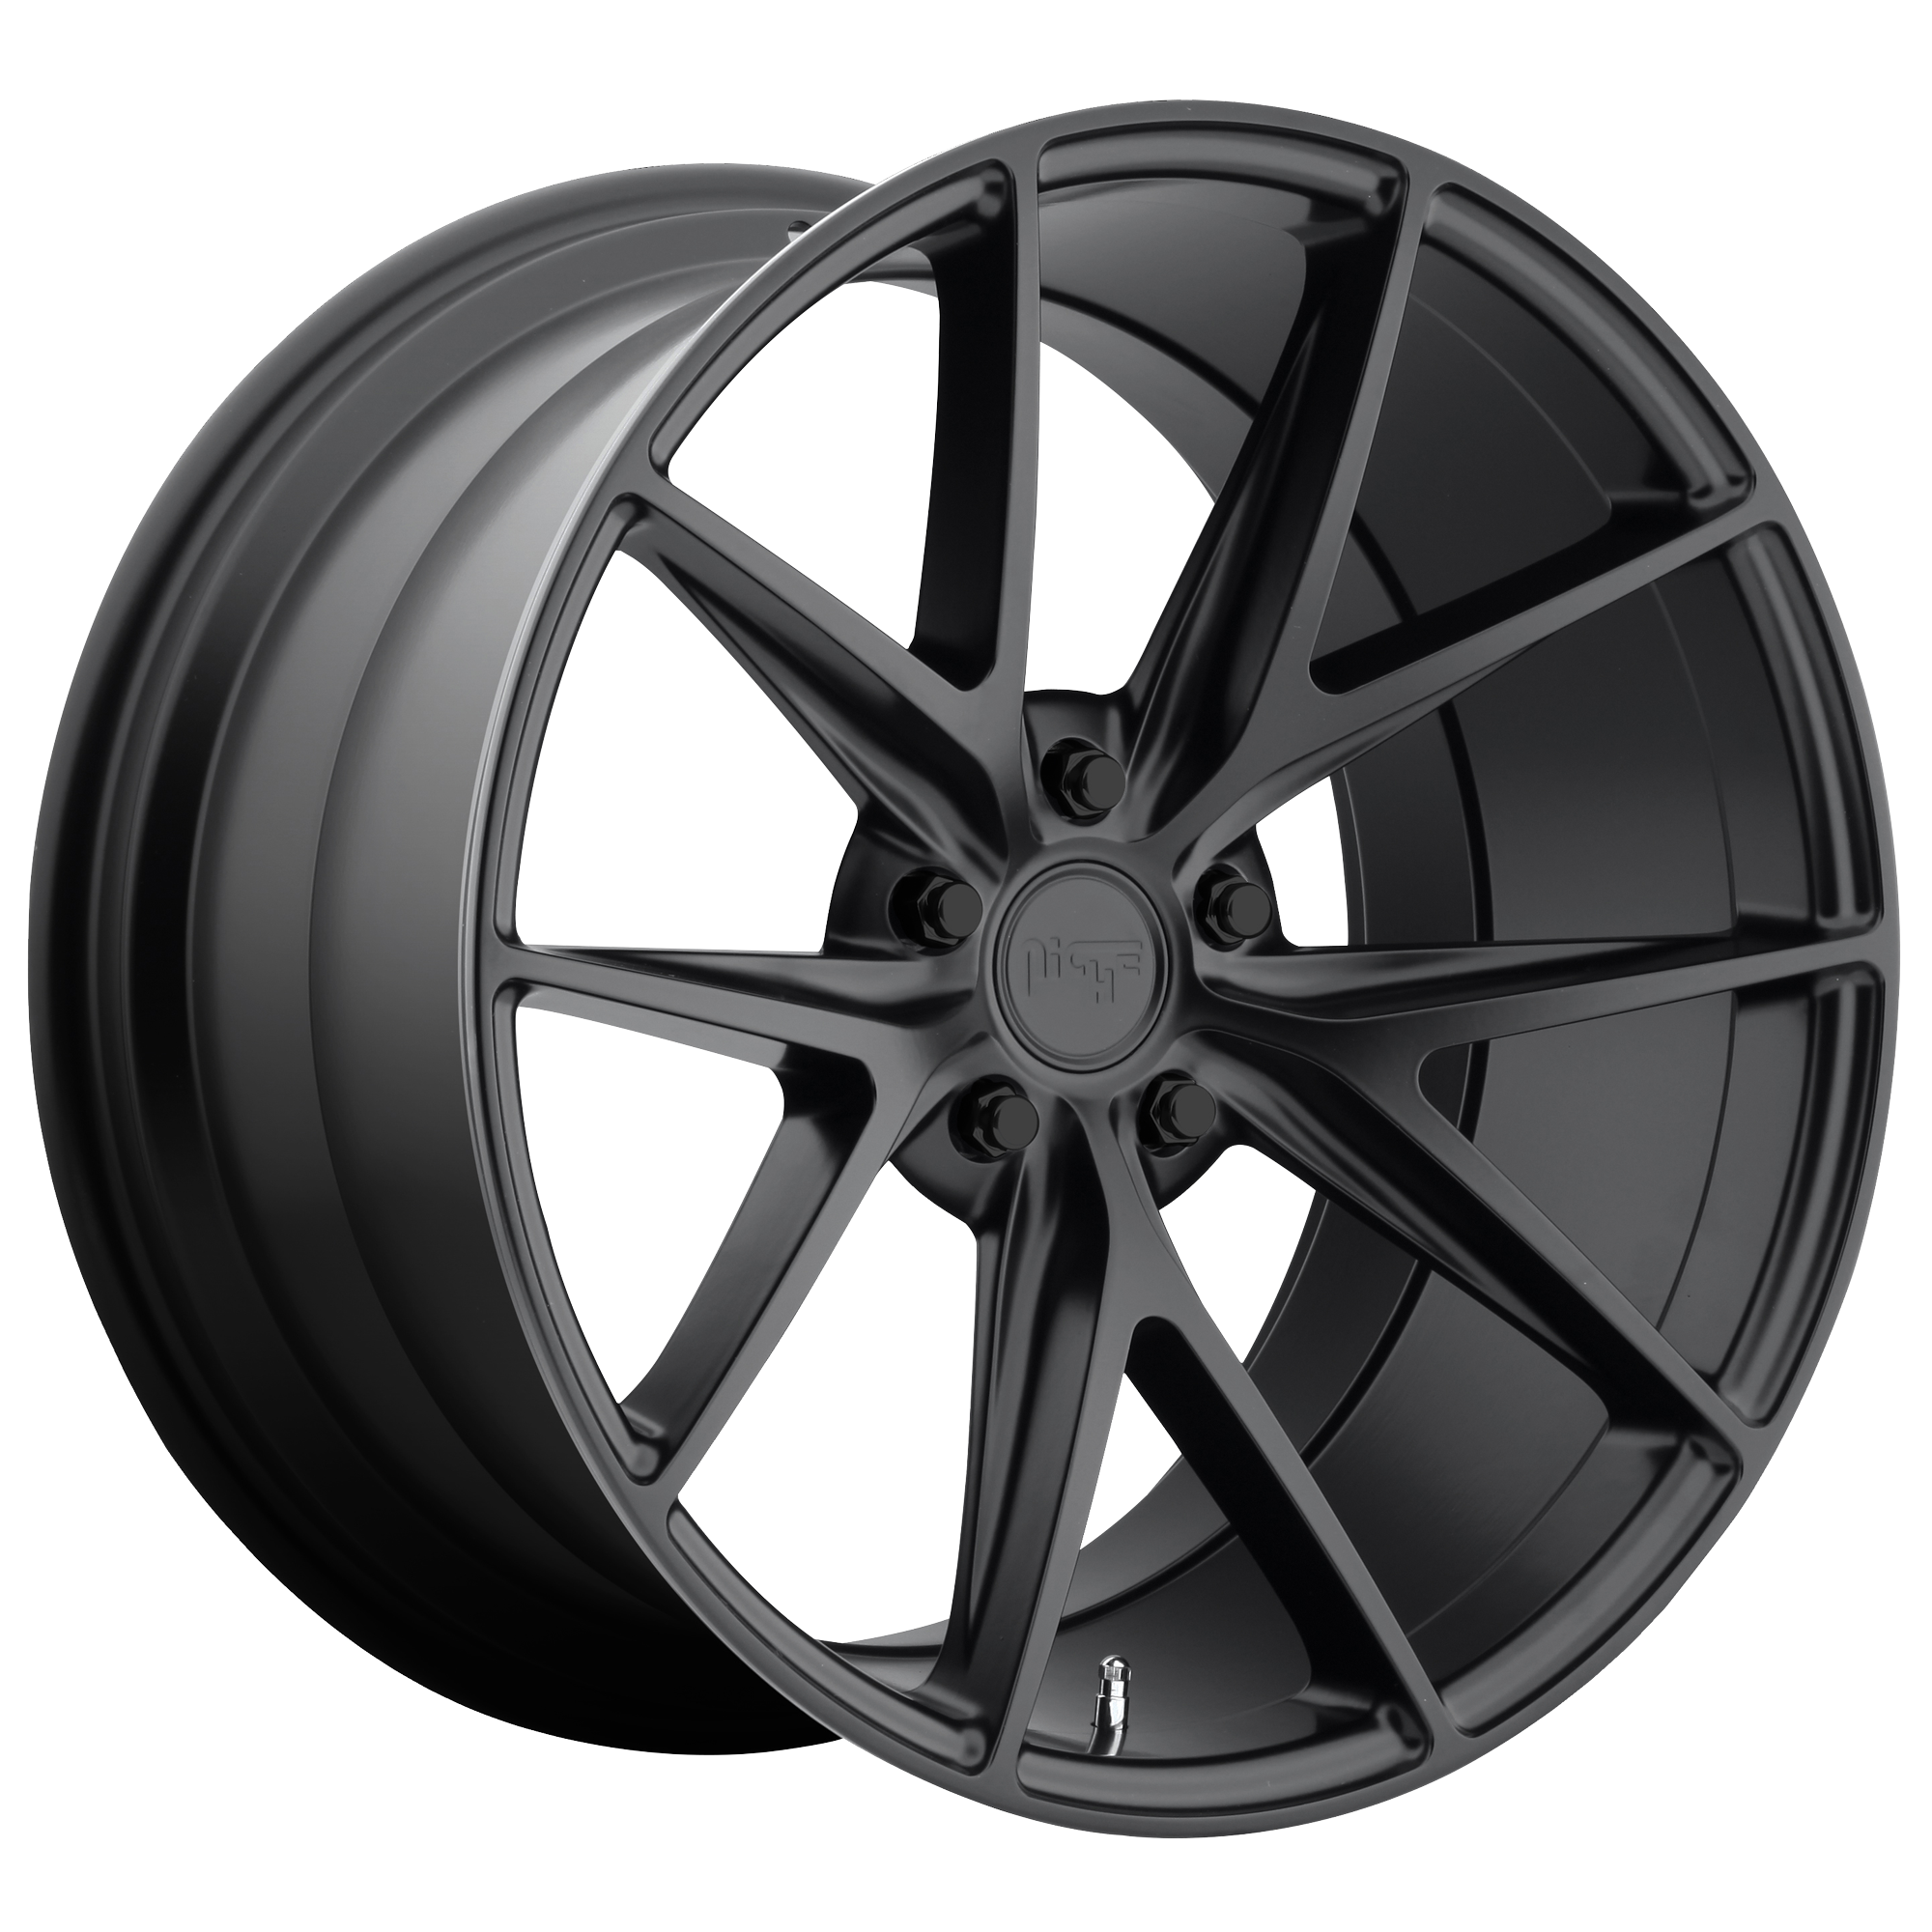 MISANO 20x9 5x120.00 MATTE BLACK (35 mm) - Tires and Engine Performance